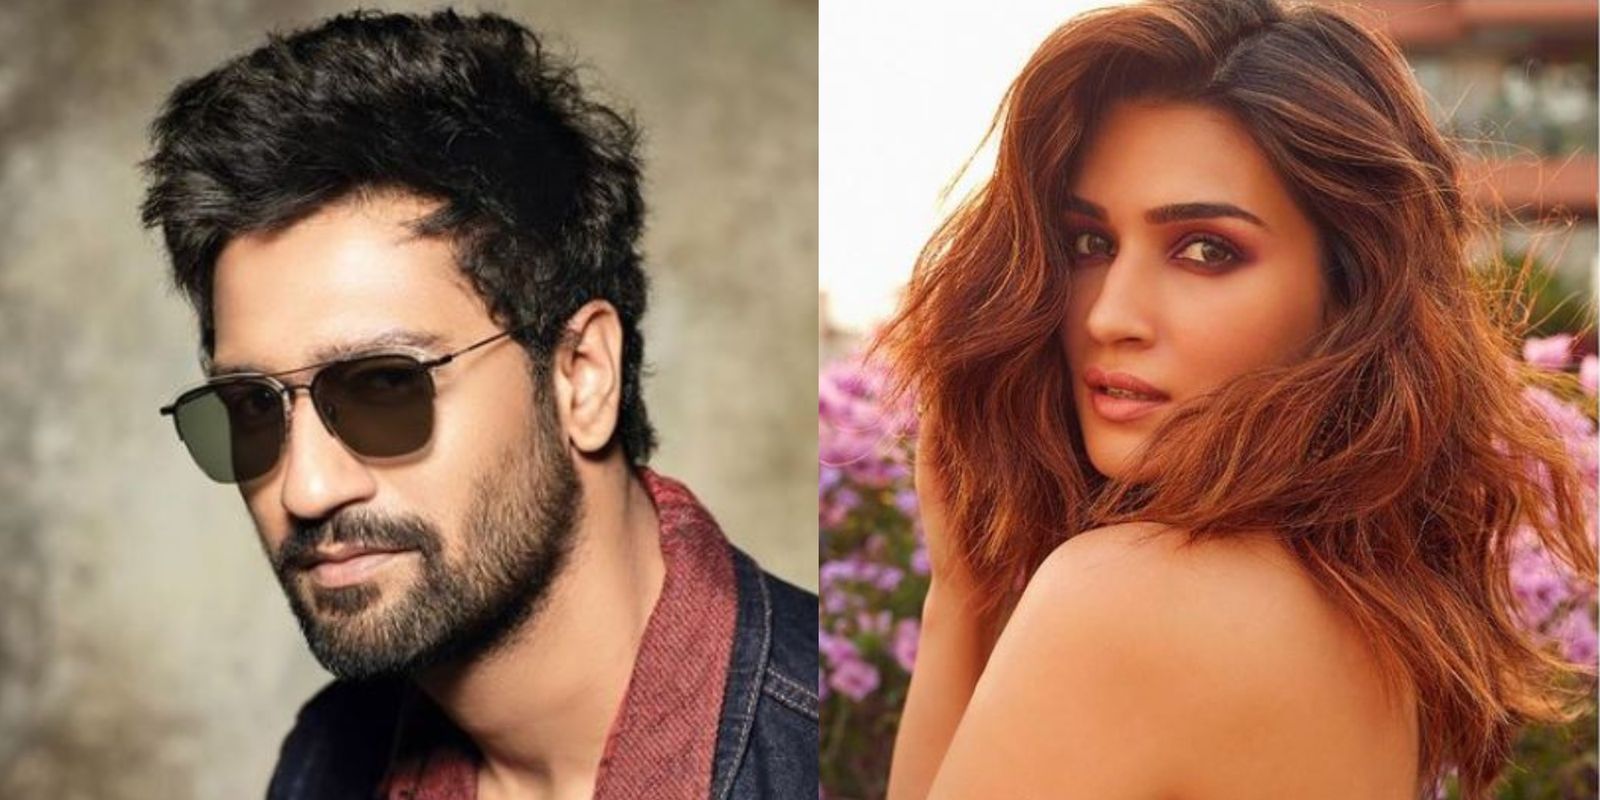 Vicky Kaushal And Kriti Sanon To Play The Lead In Rehnaa Hai Terre Dil Mein? Here's What We Know